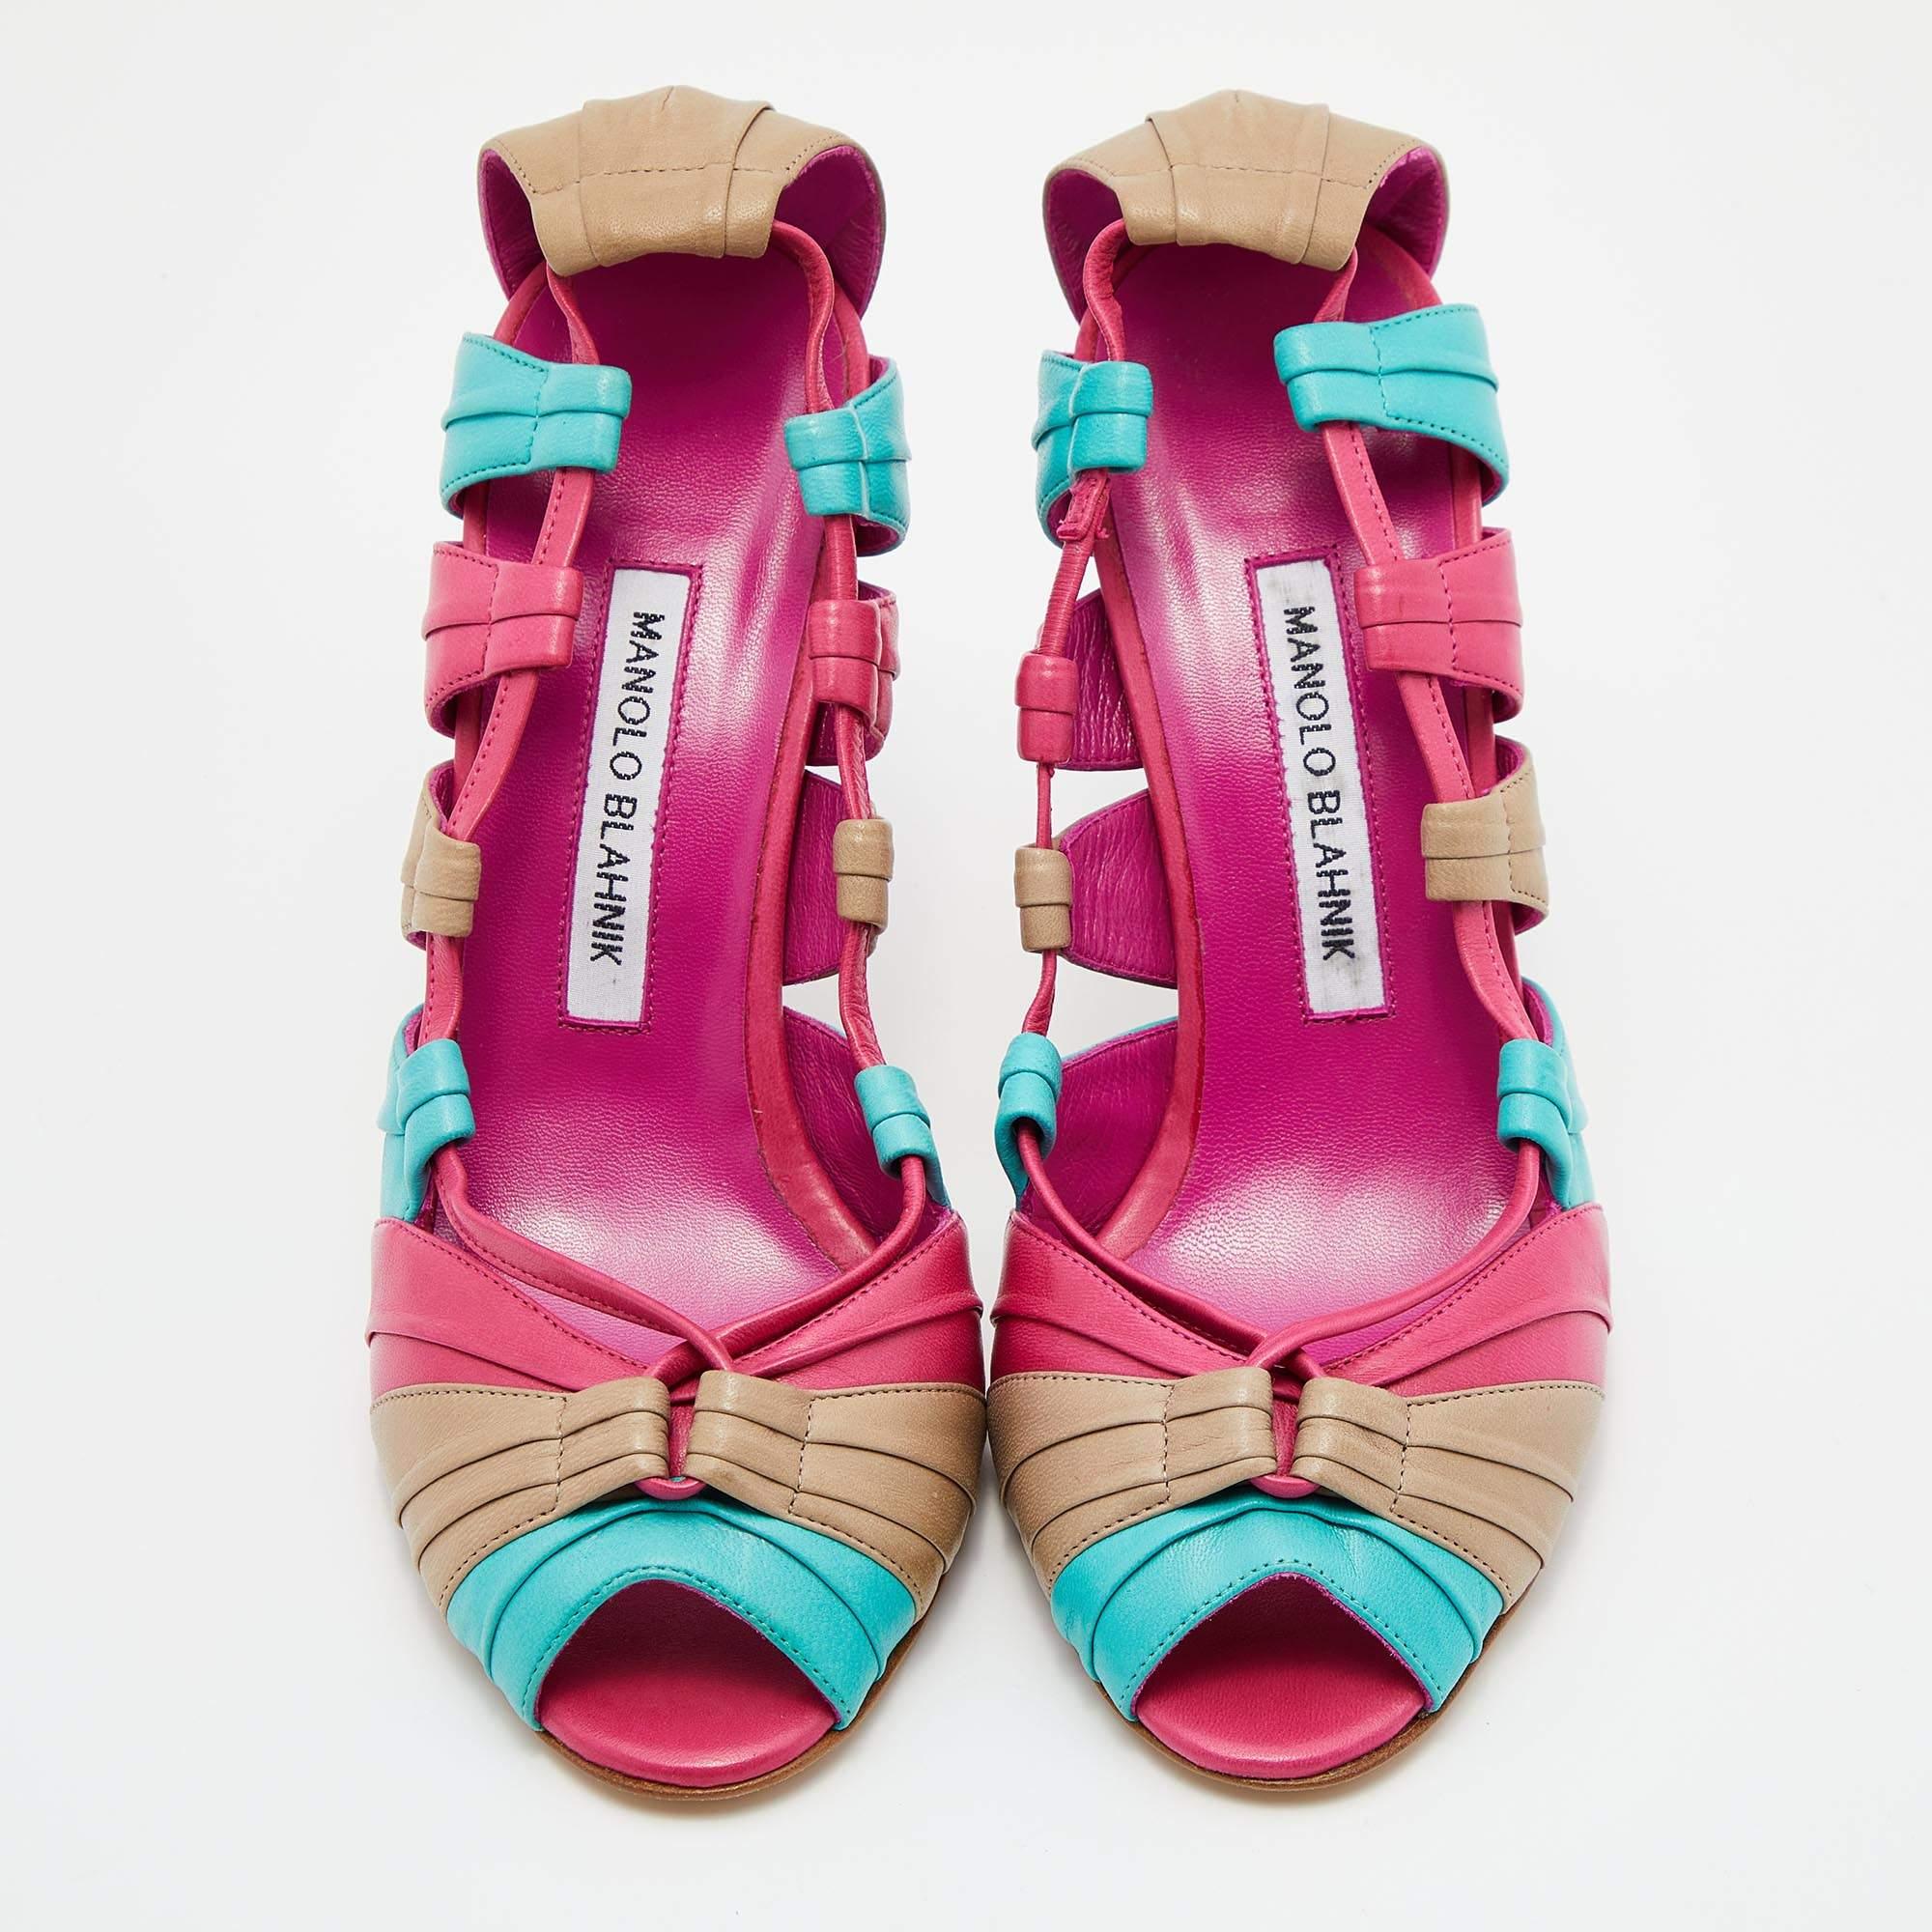 Deliver statement looks with these sandals from Manolo Blahnik! From their shape and detailing to their overall appeal, they exude elegance. The sandals feature peep toes, three delight hues, and stiletto heels..

